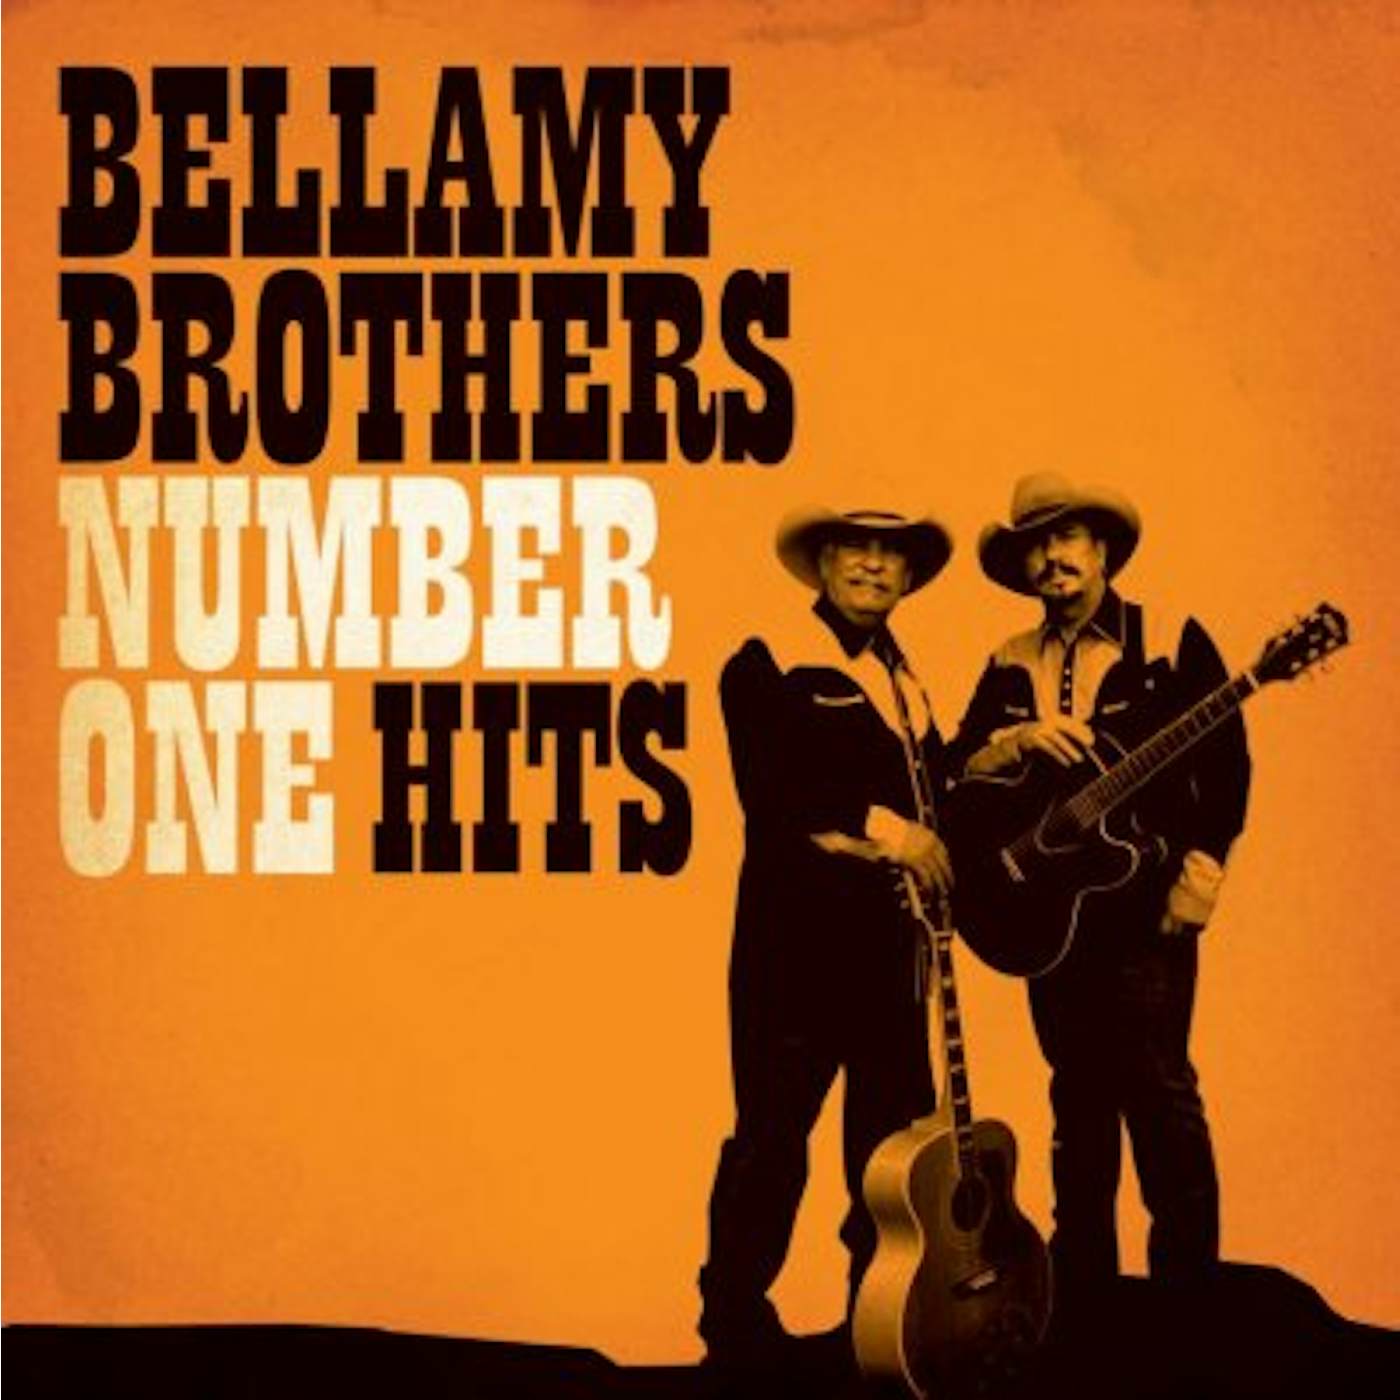 The Bellamy Brothers NUMBER ONE HITS CD